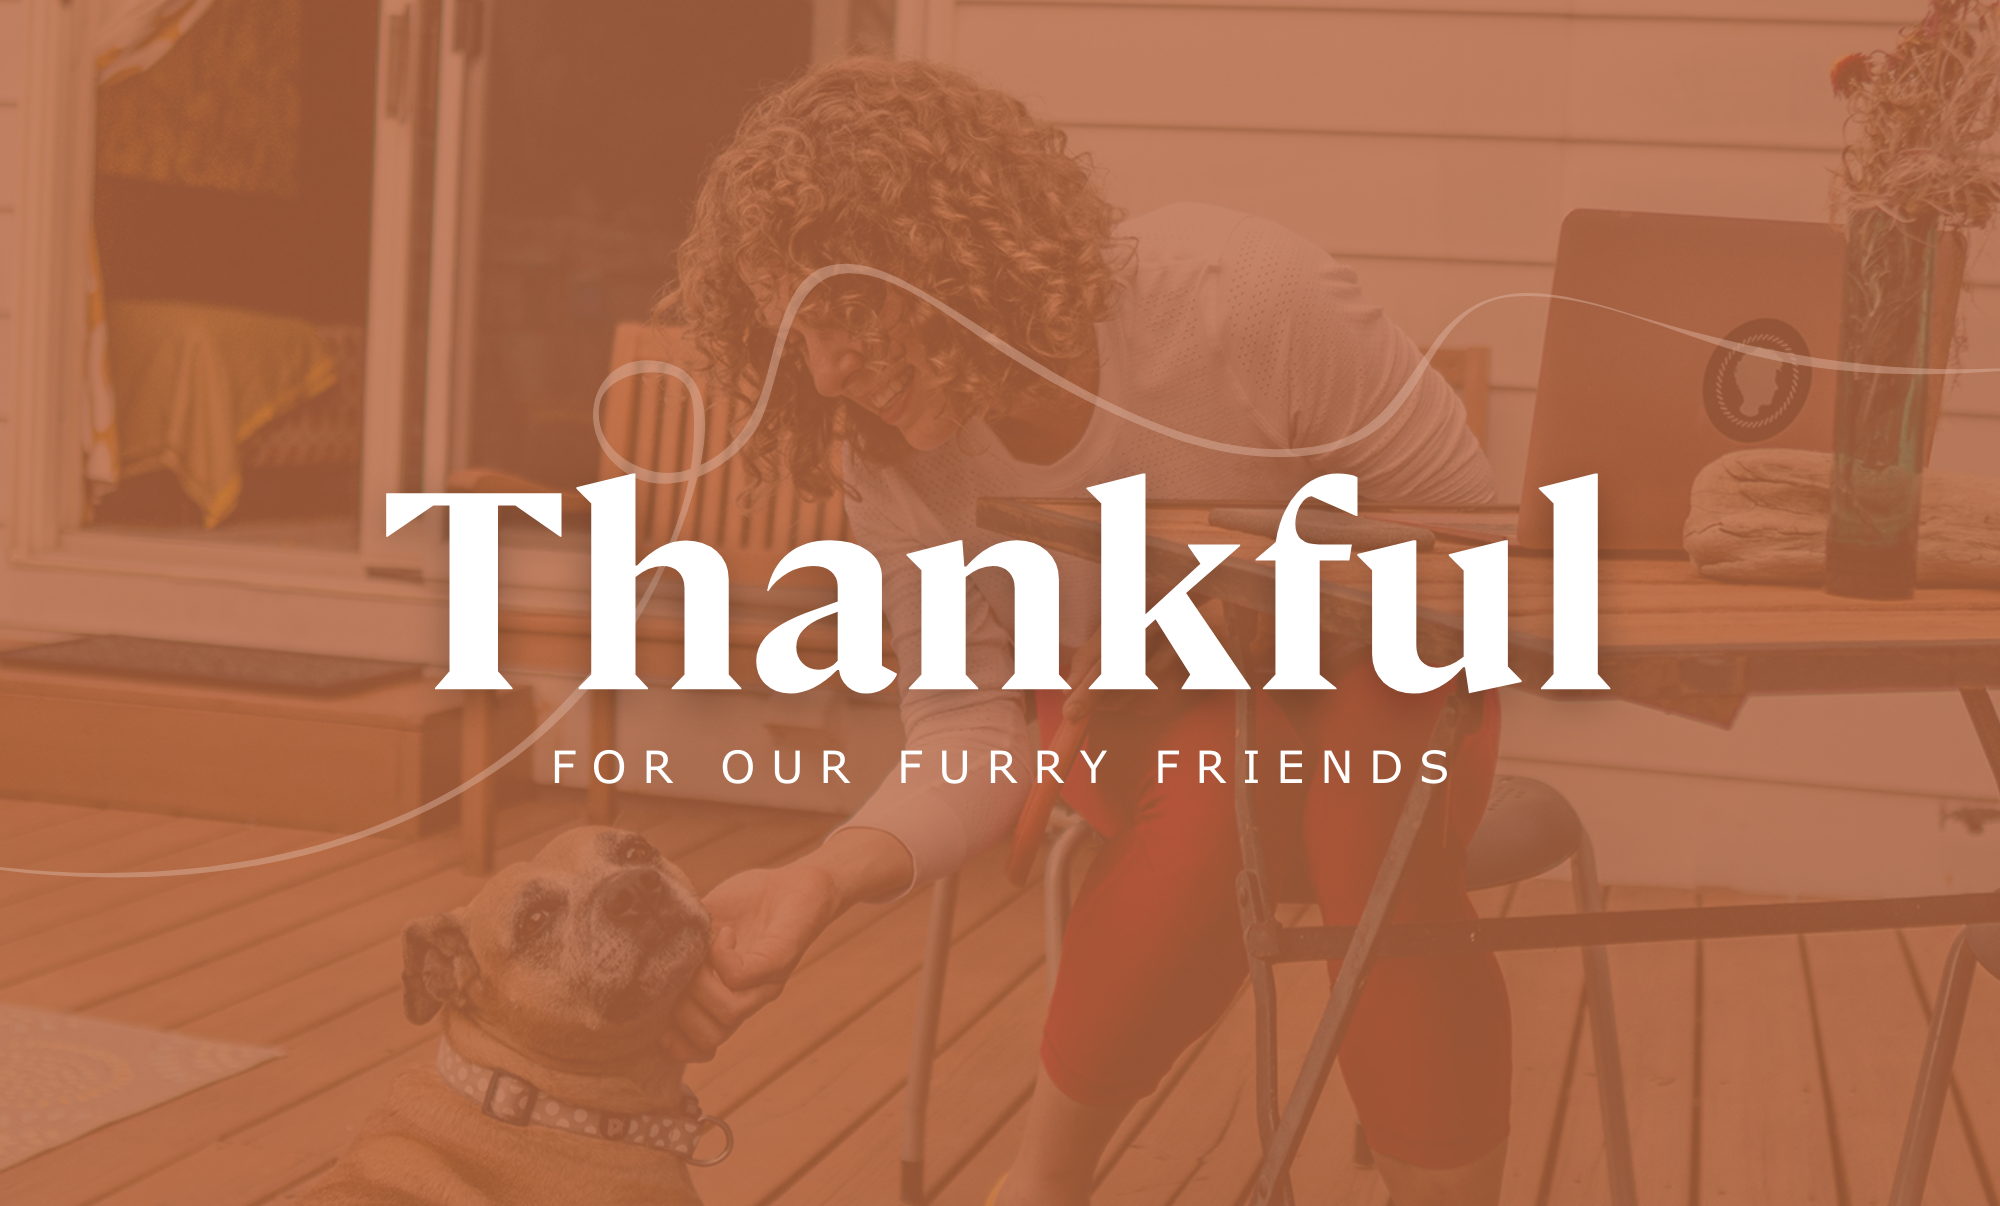 We Are Thankful For Our Furry Friends